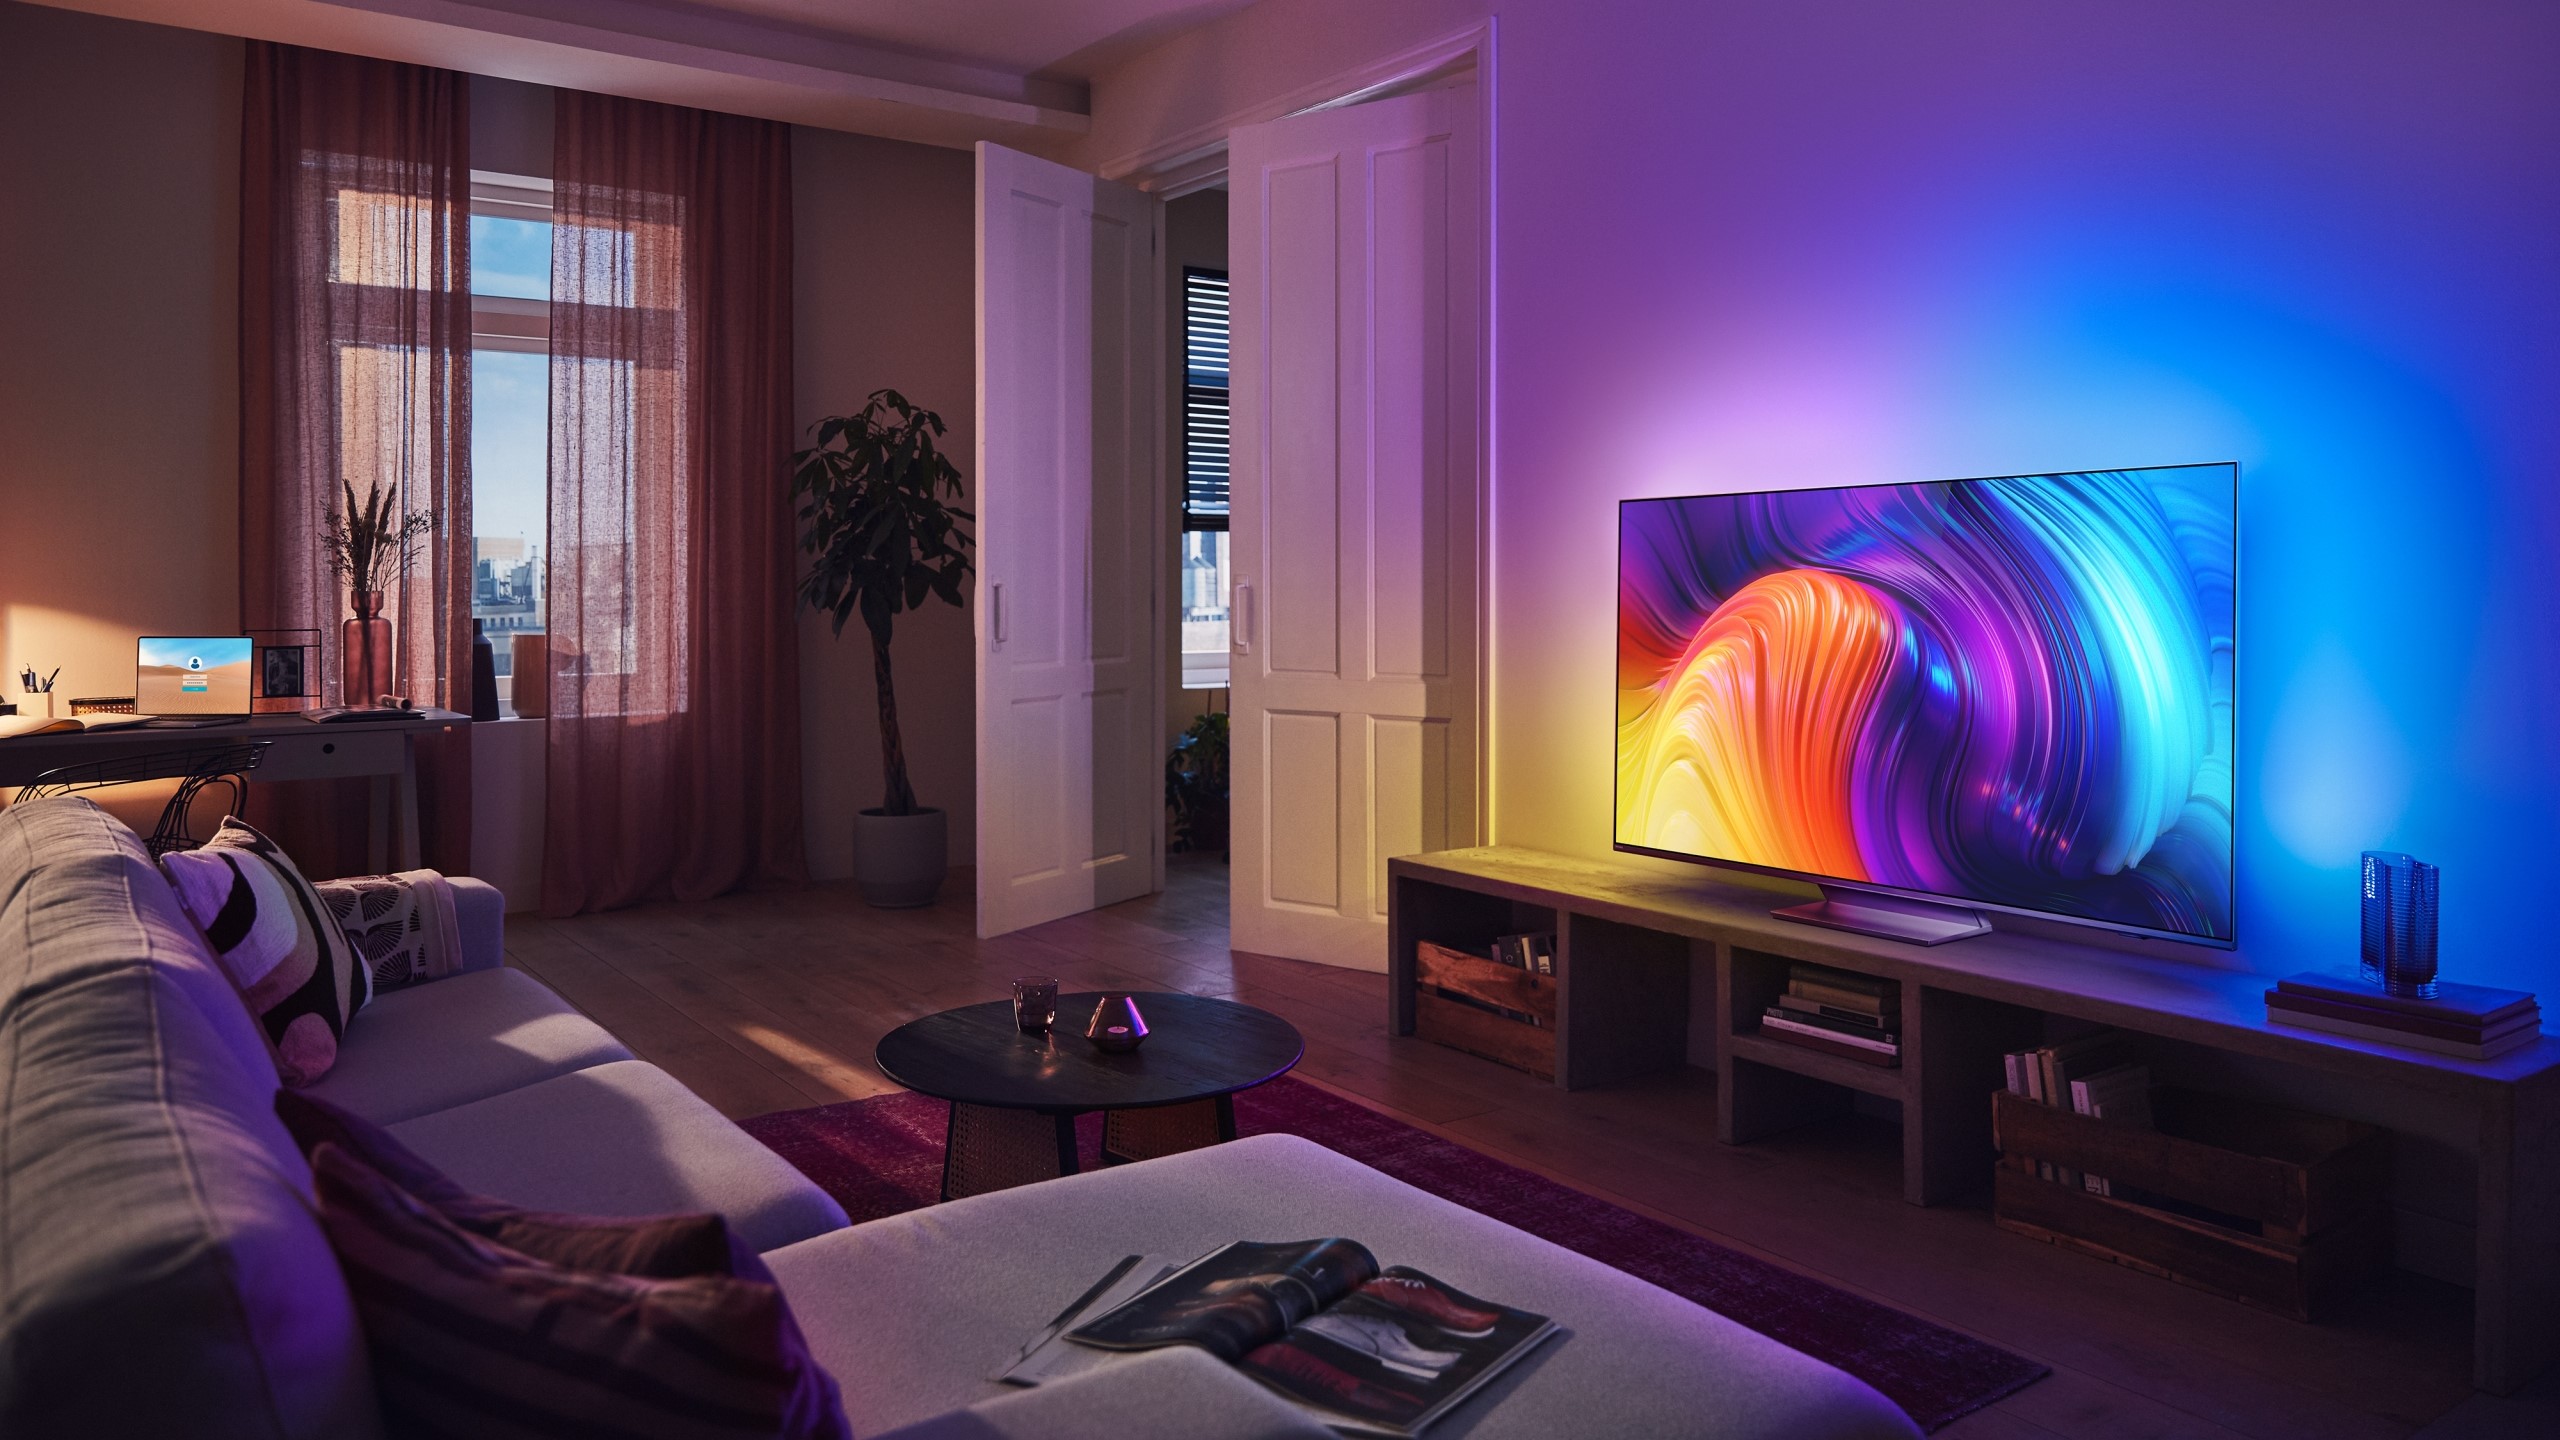 The Philips OLED807 on display in a living room - the wall behind it is light up by the Ambilight feature